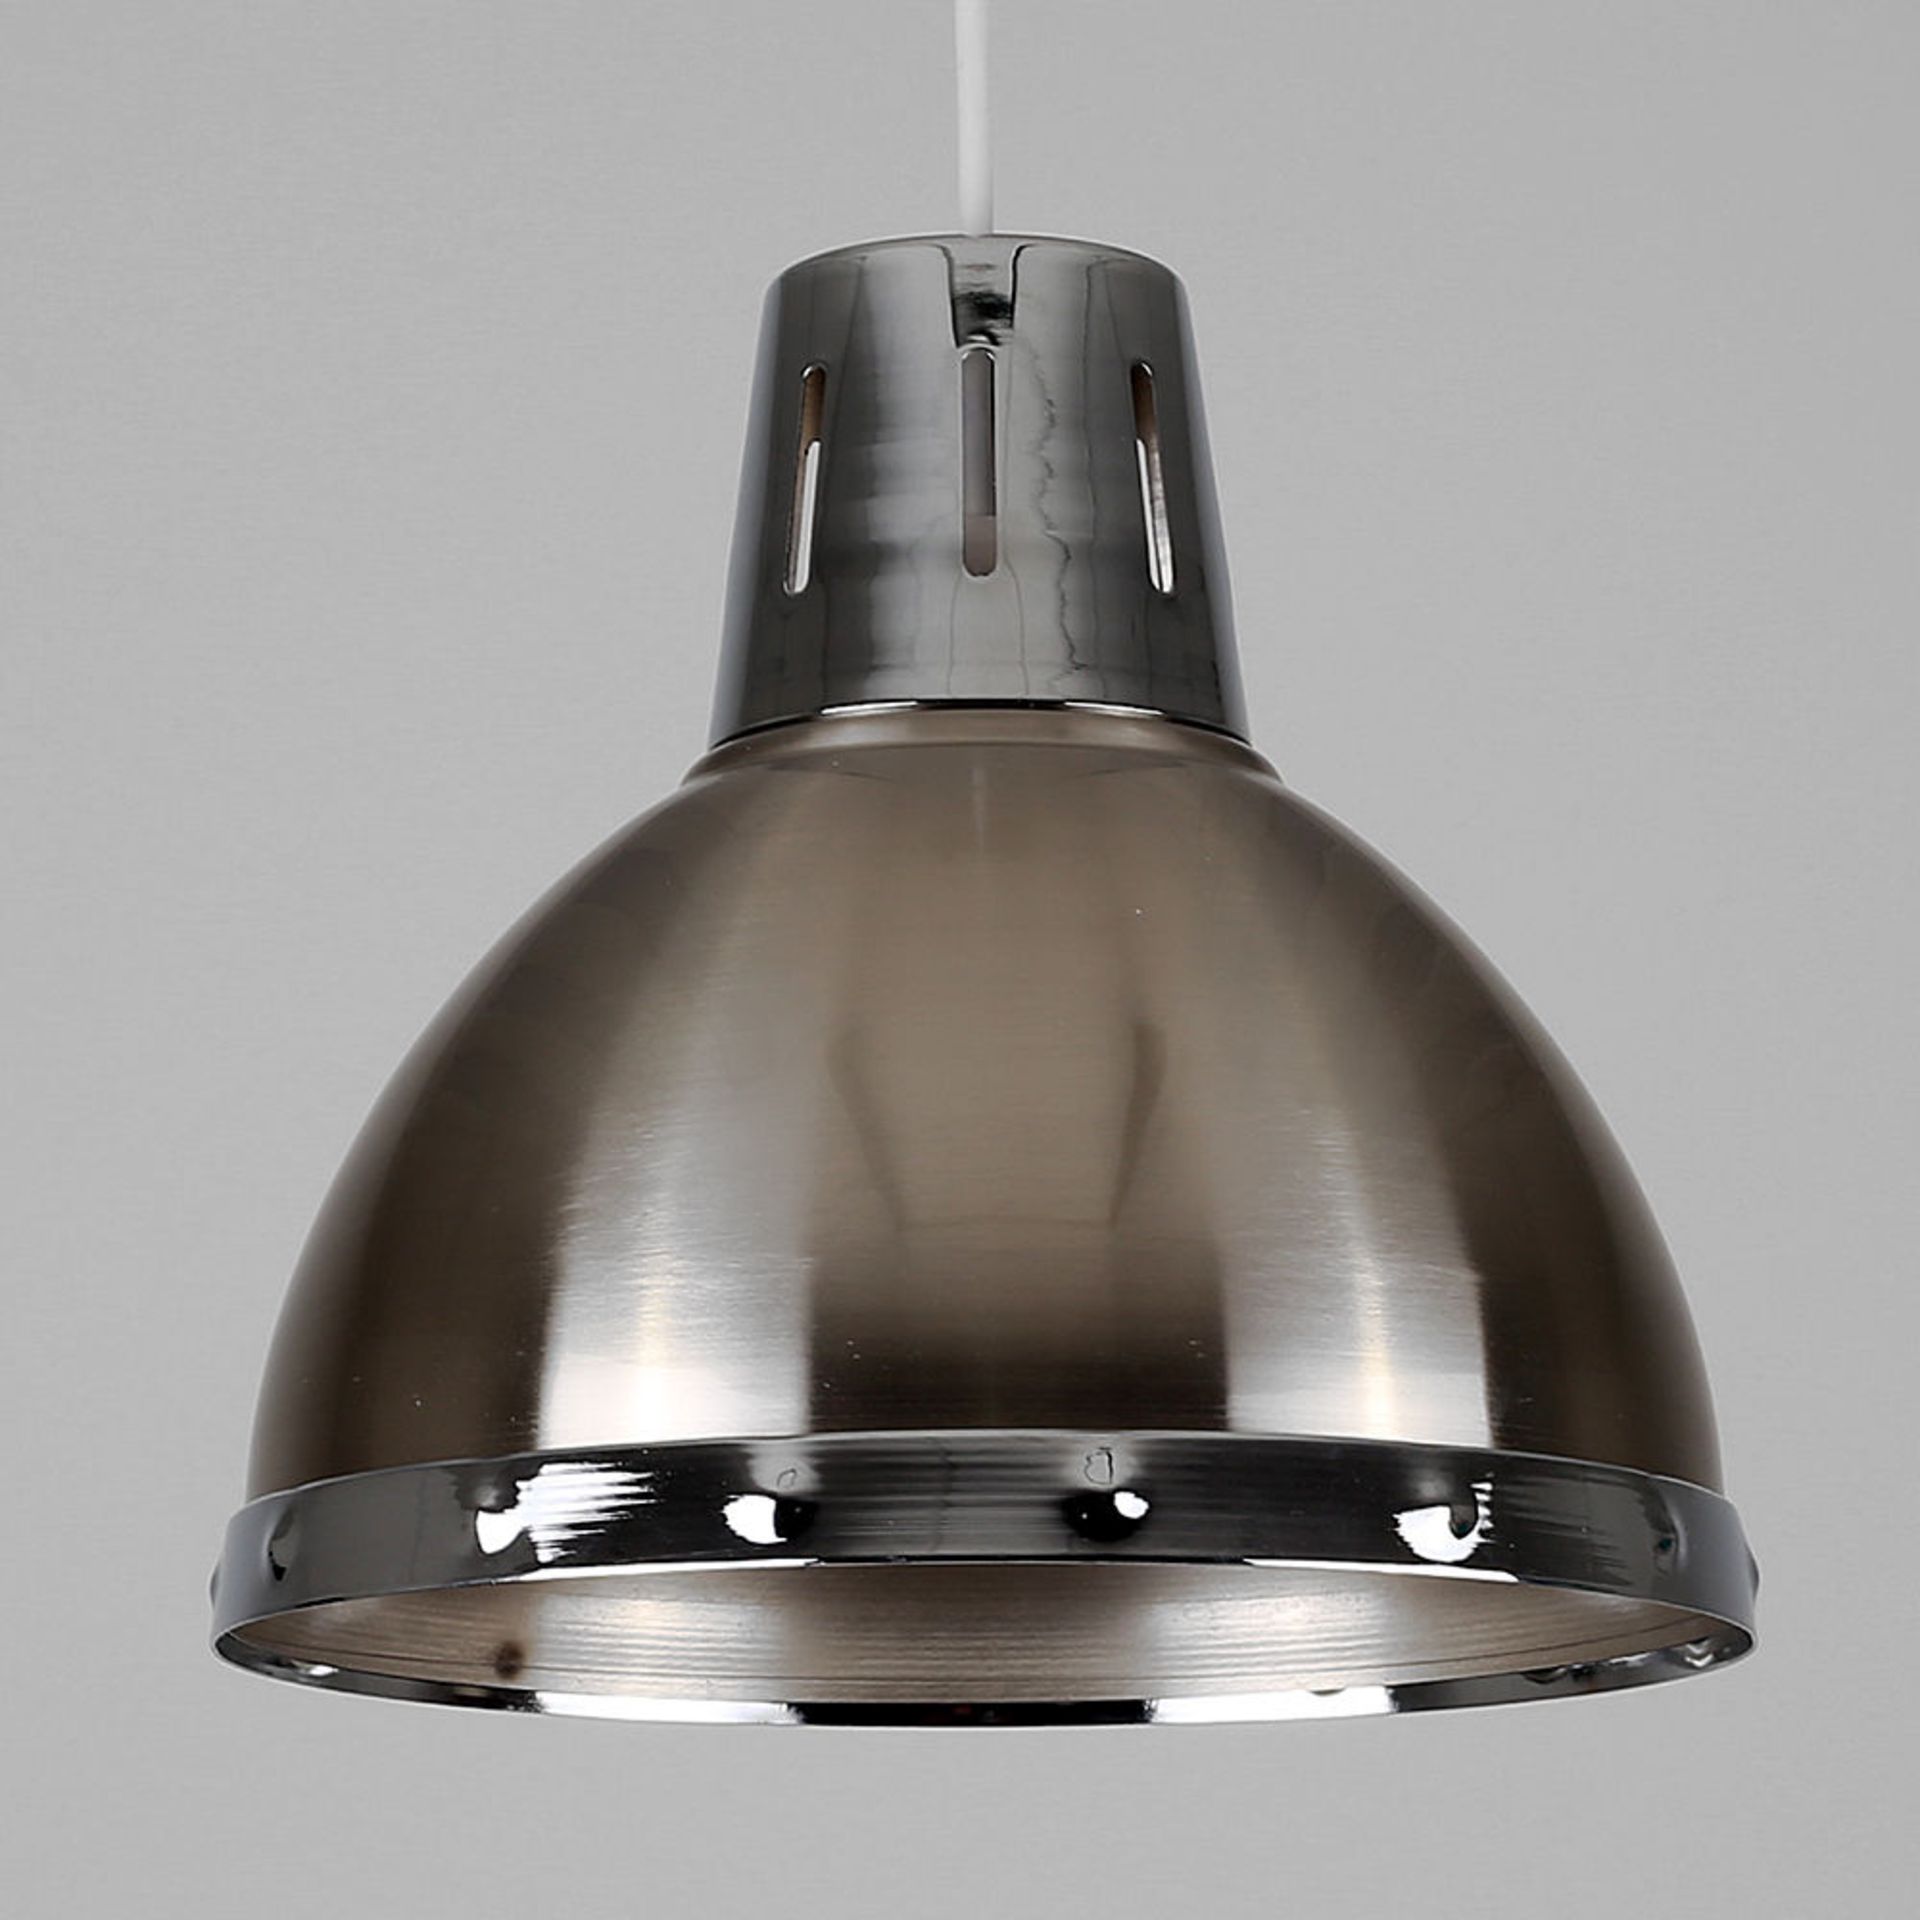 Contemporary Brushed Chrome Retro Pendant Light Shade A Modern Industrial Style Ceiling Pendant